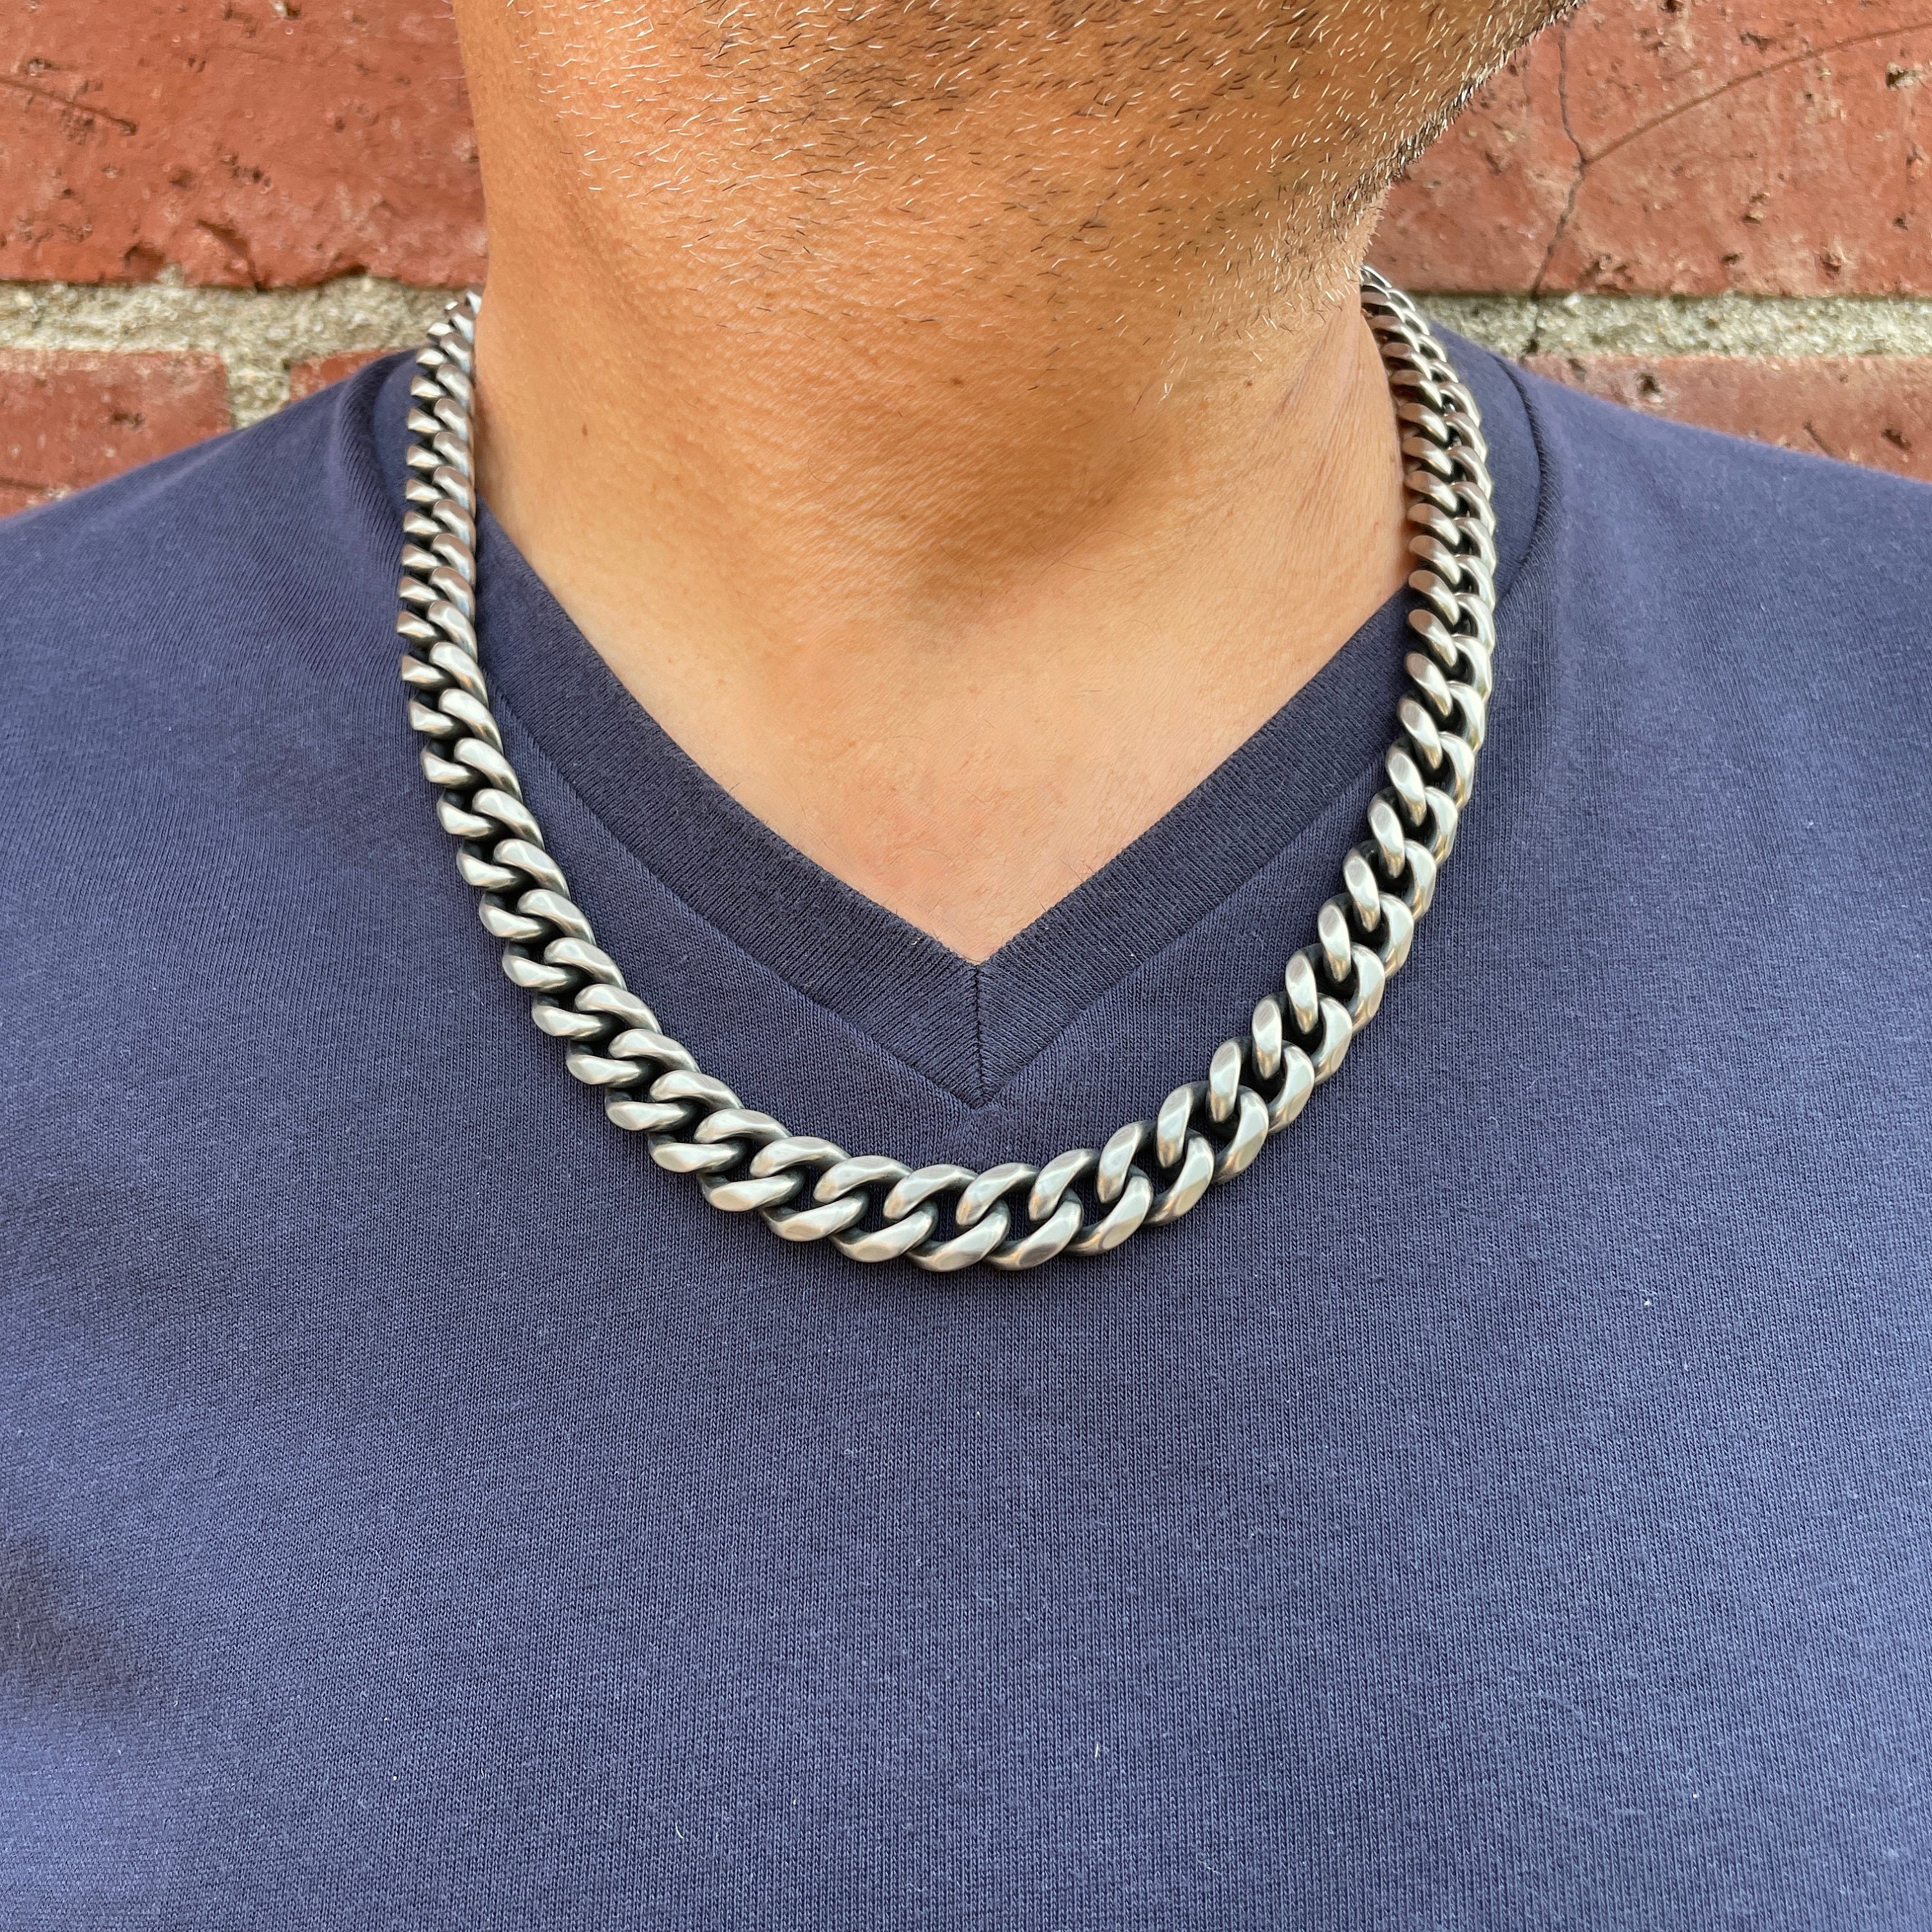 10 mm Silver-Tone Stainless Steel Cuban Chain Necklace, In stock!